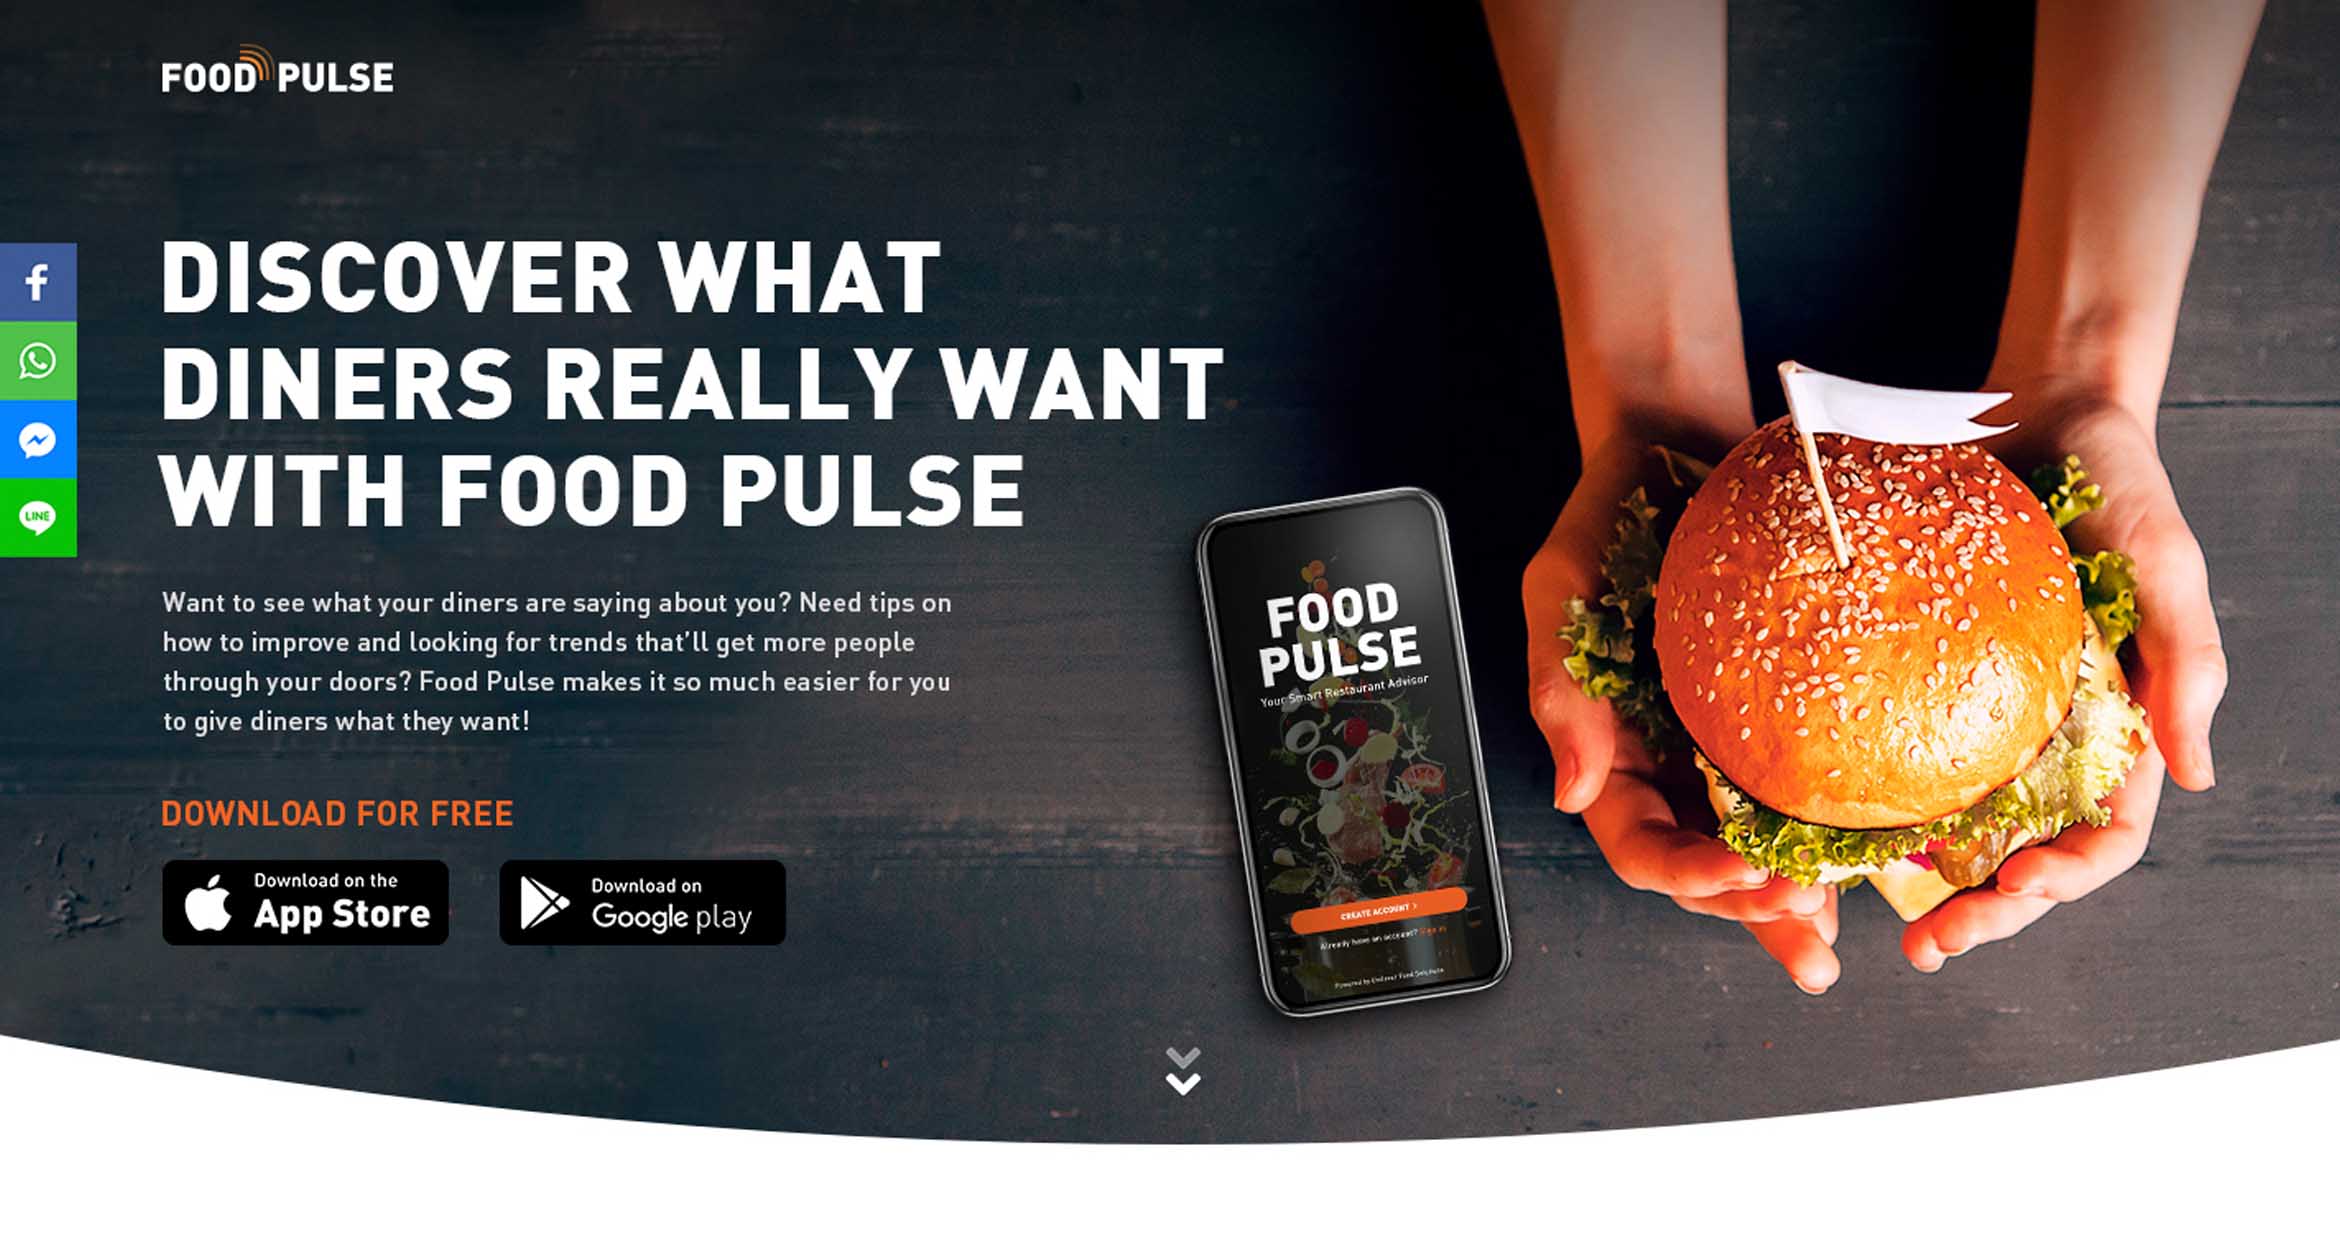 Discover what diners really want with Food Pulse 